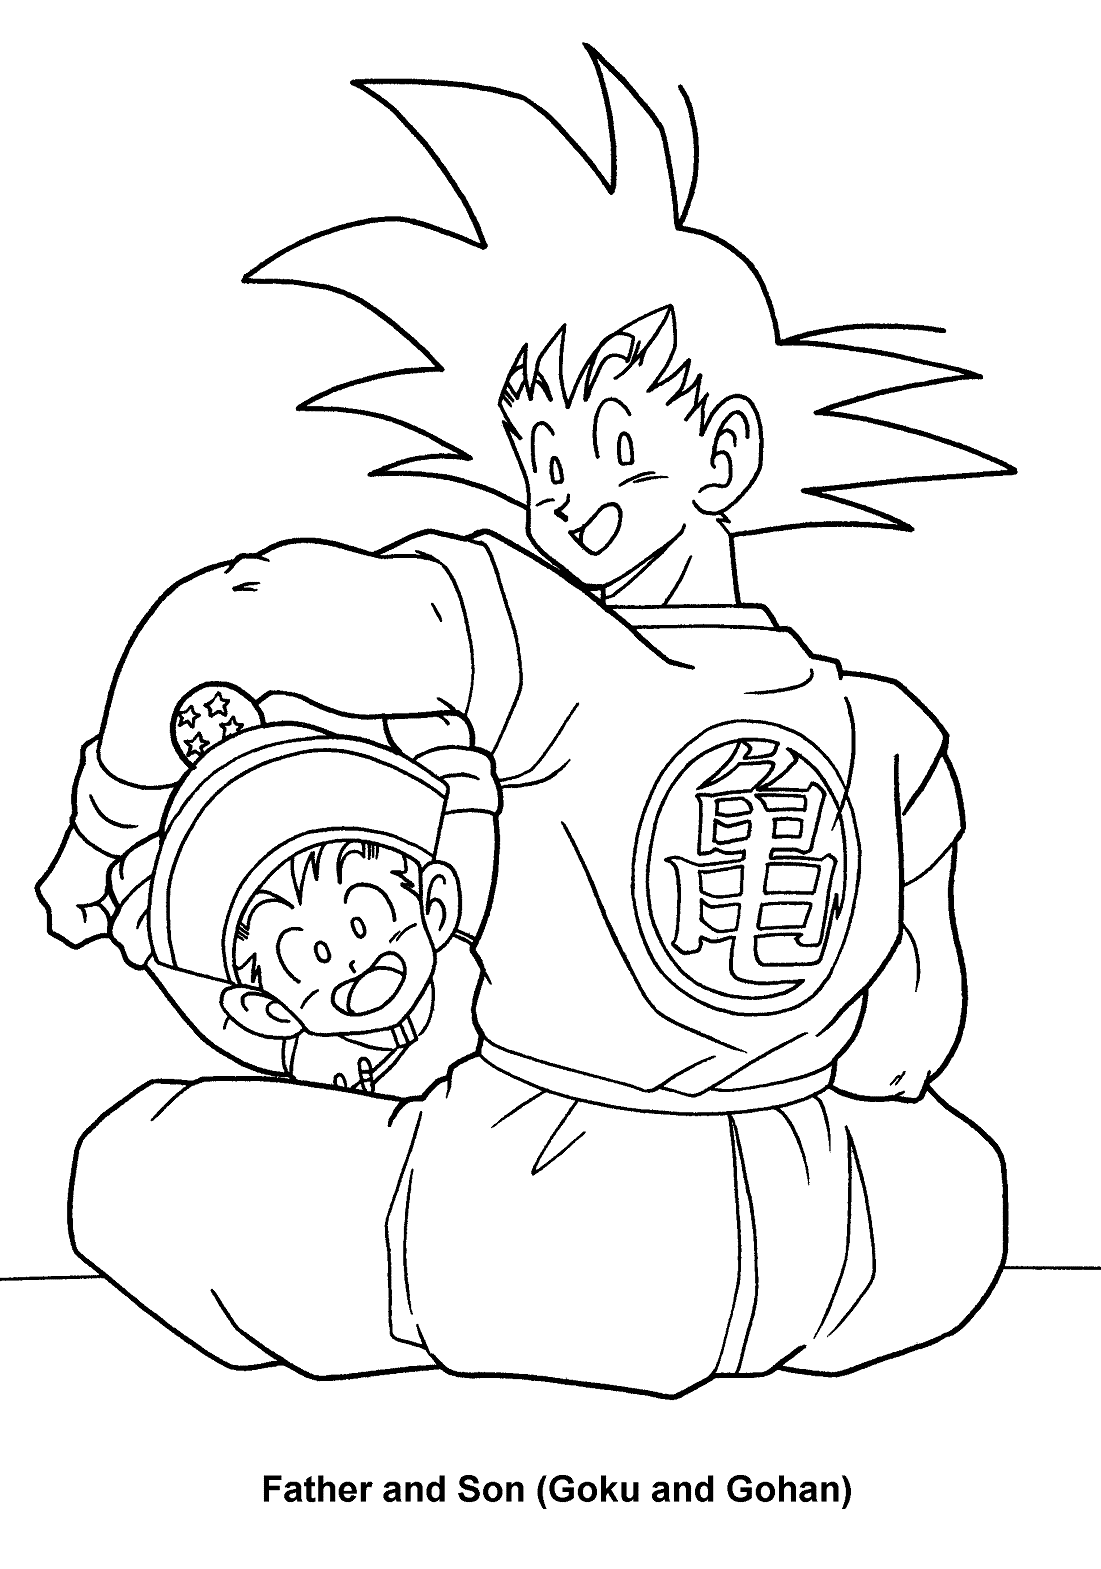 Dragon Ball Z Coloring Pages   Coloring Pages For Kids And Adults